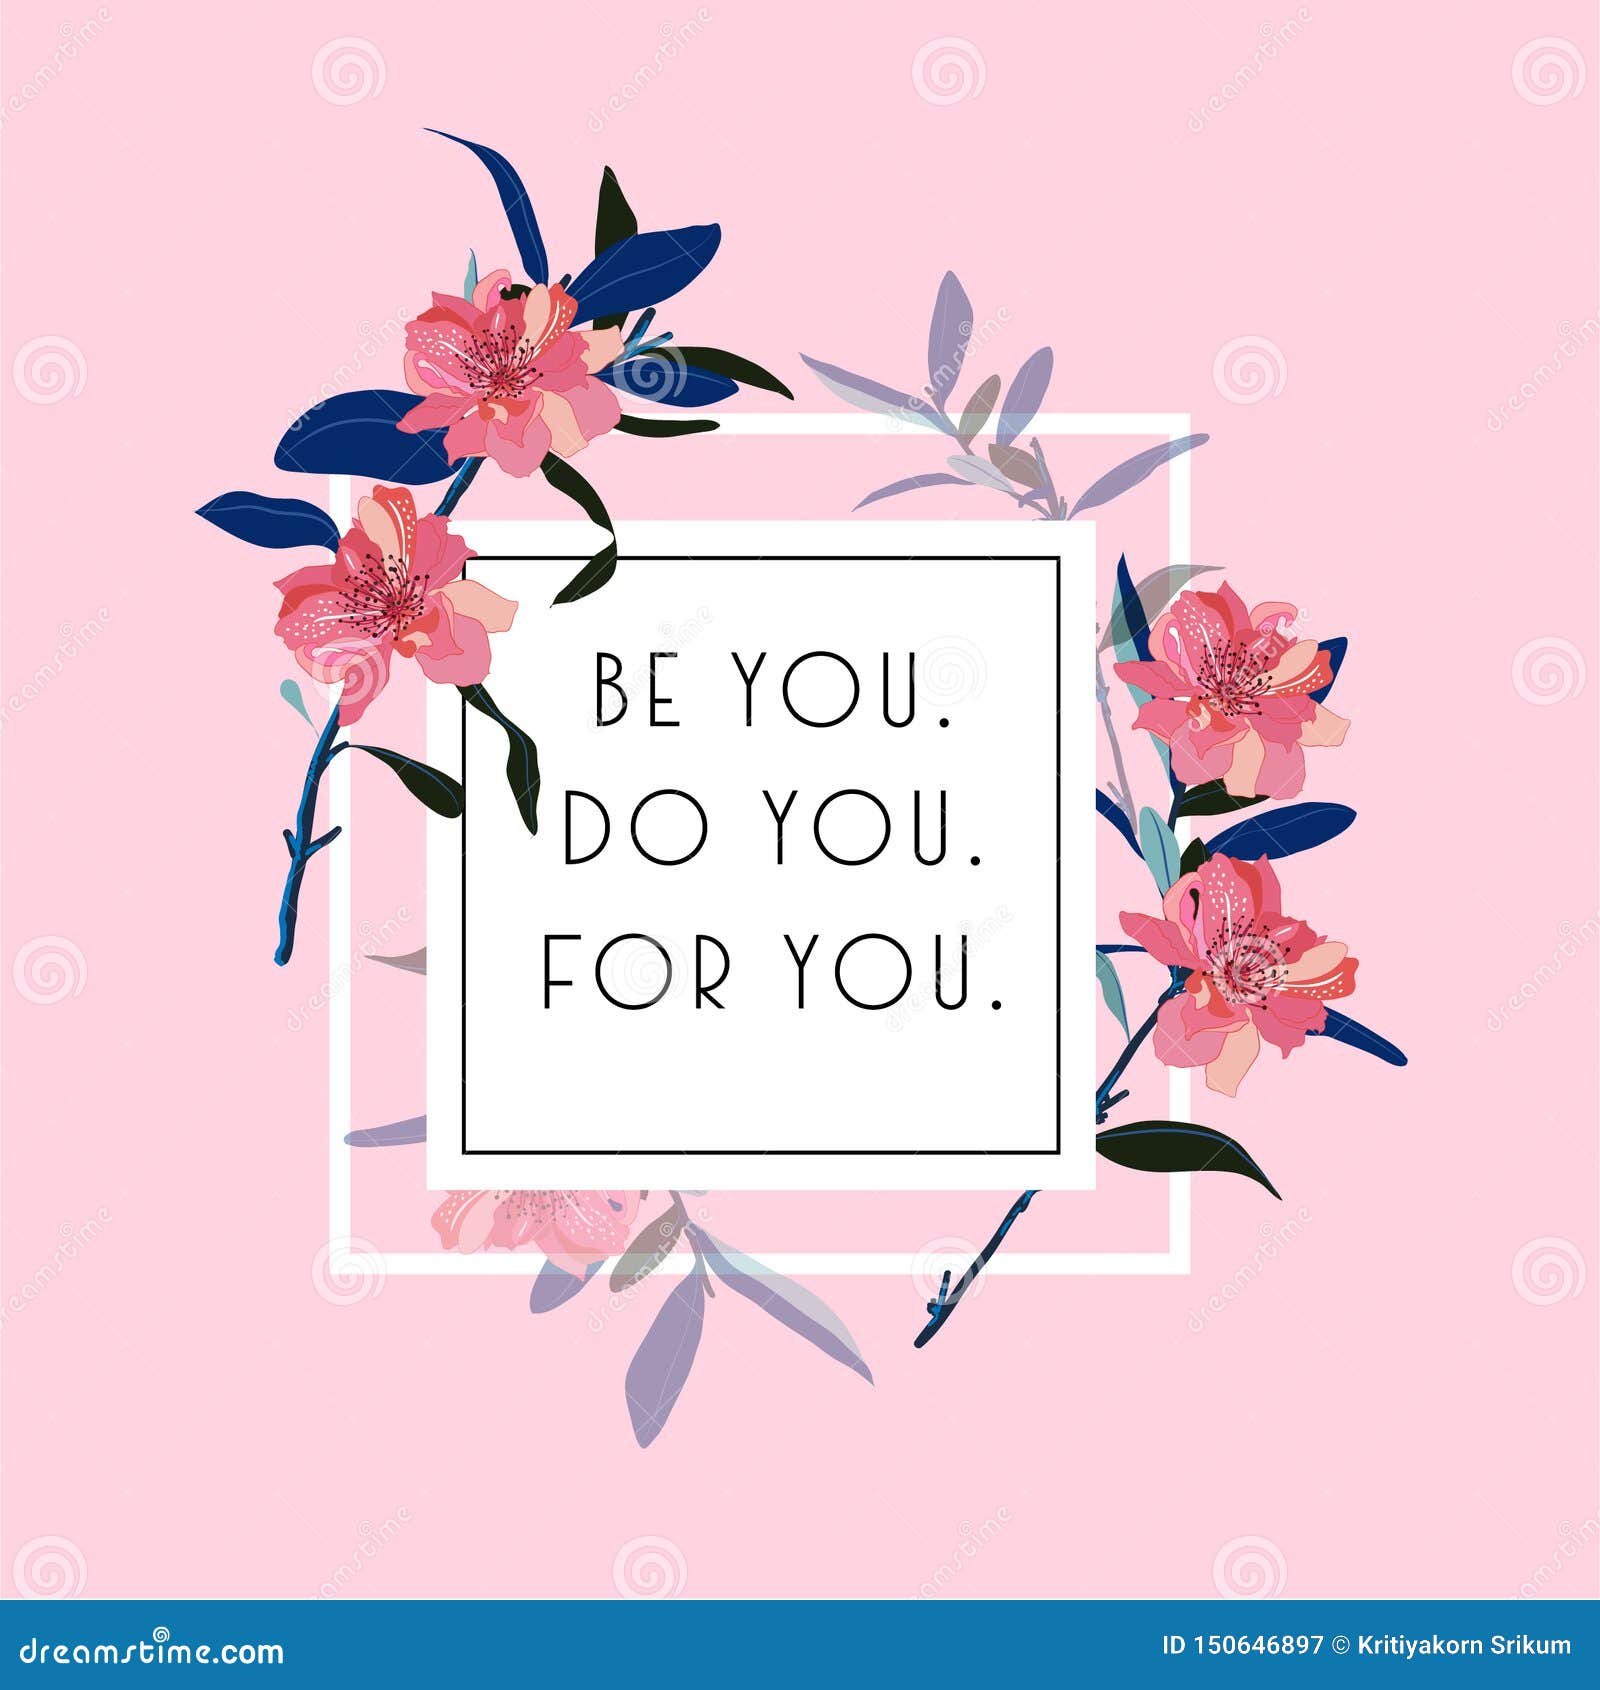 blooming flowers with white square typo play in  postive quote or slogan Ã¢â¬Å be yoy,do you,for youÃ¢â¬Â  on  light pink